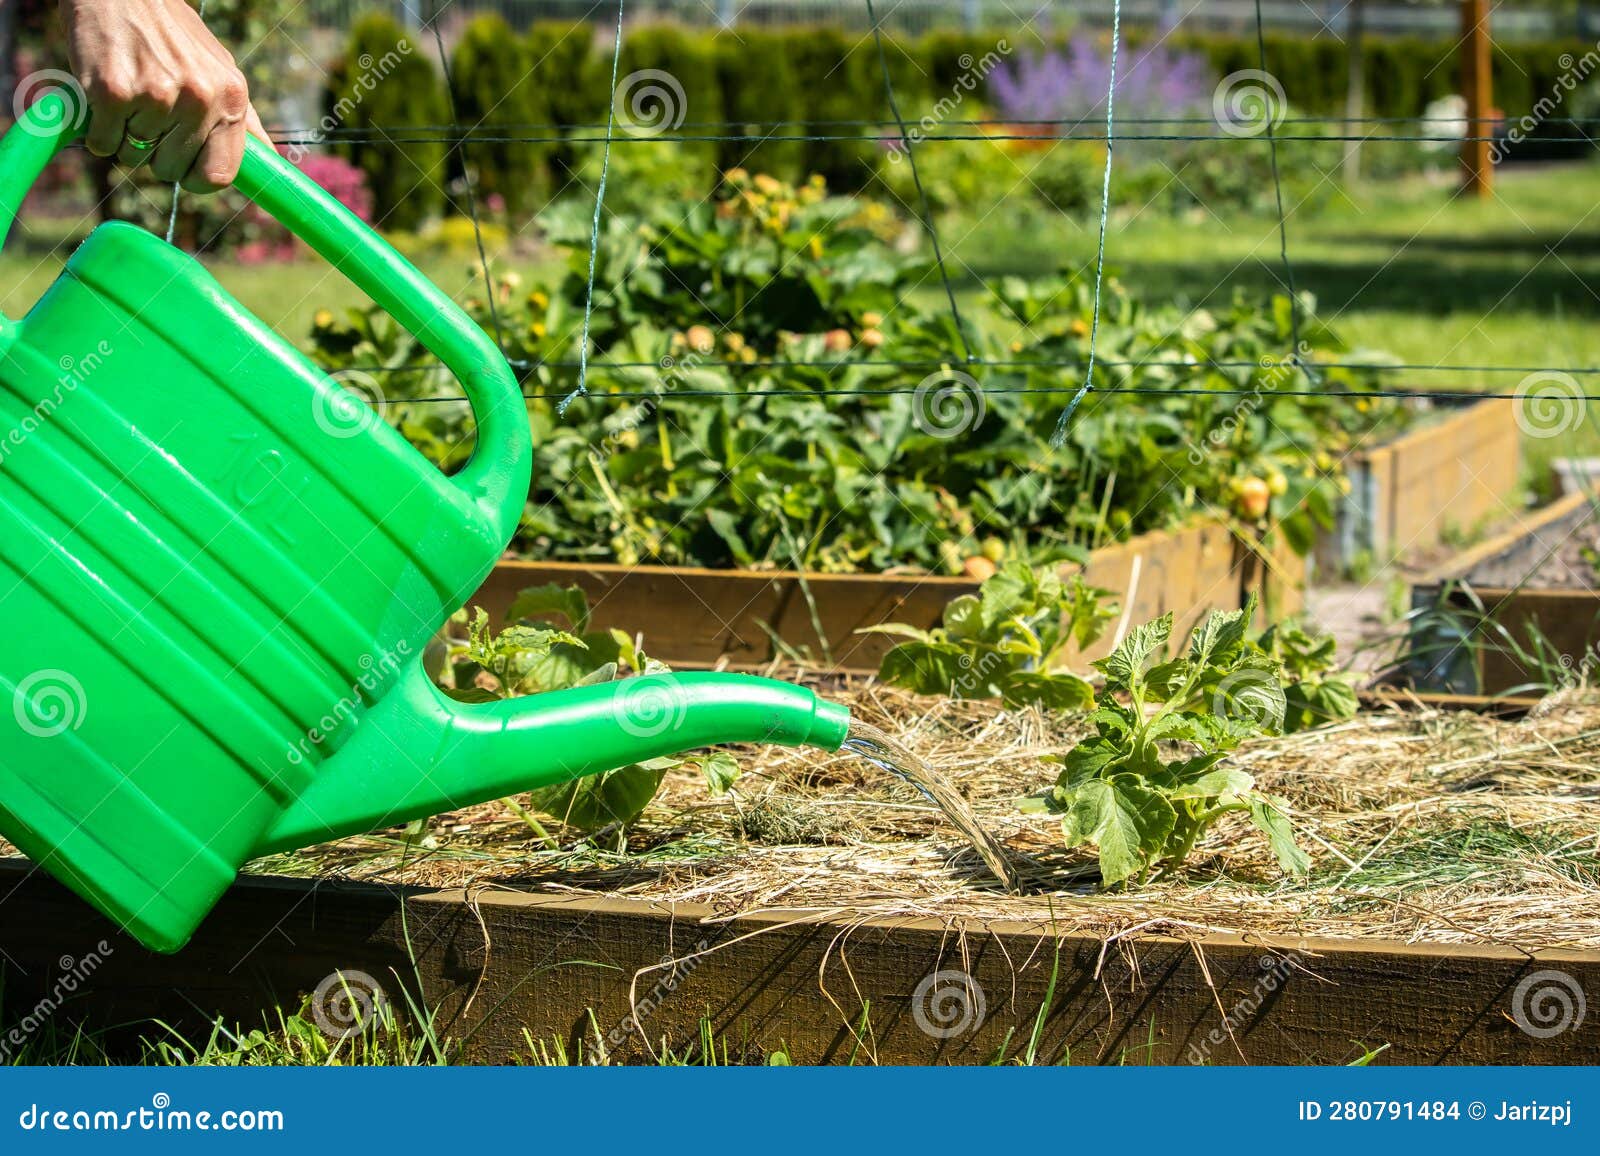 watering garden cucumbers with a watering can. gardening concept